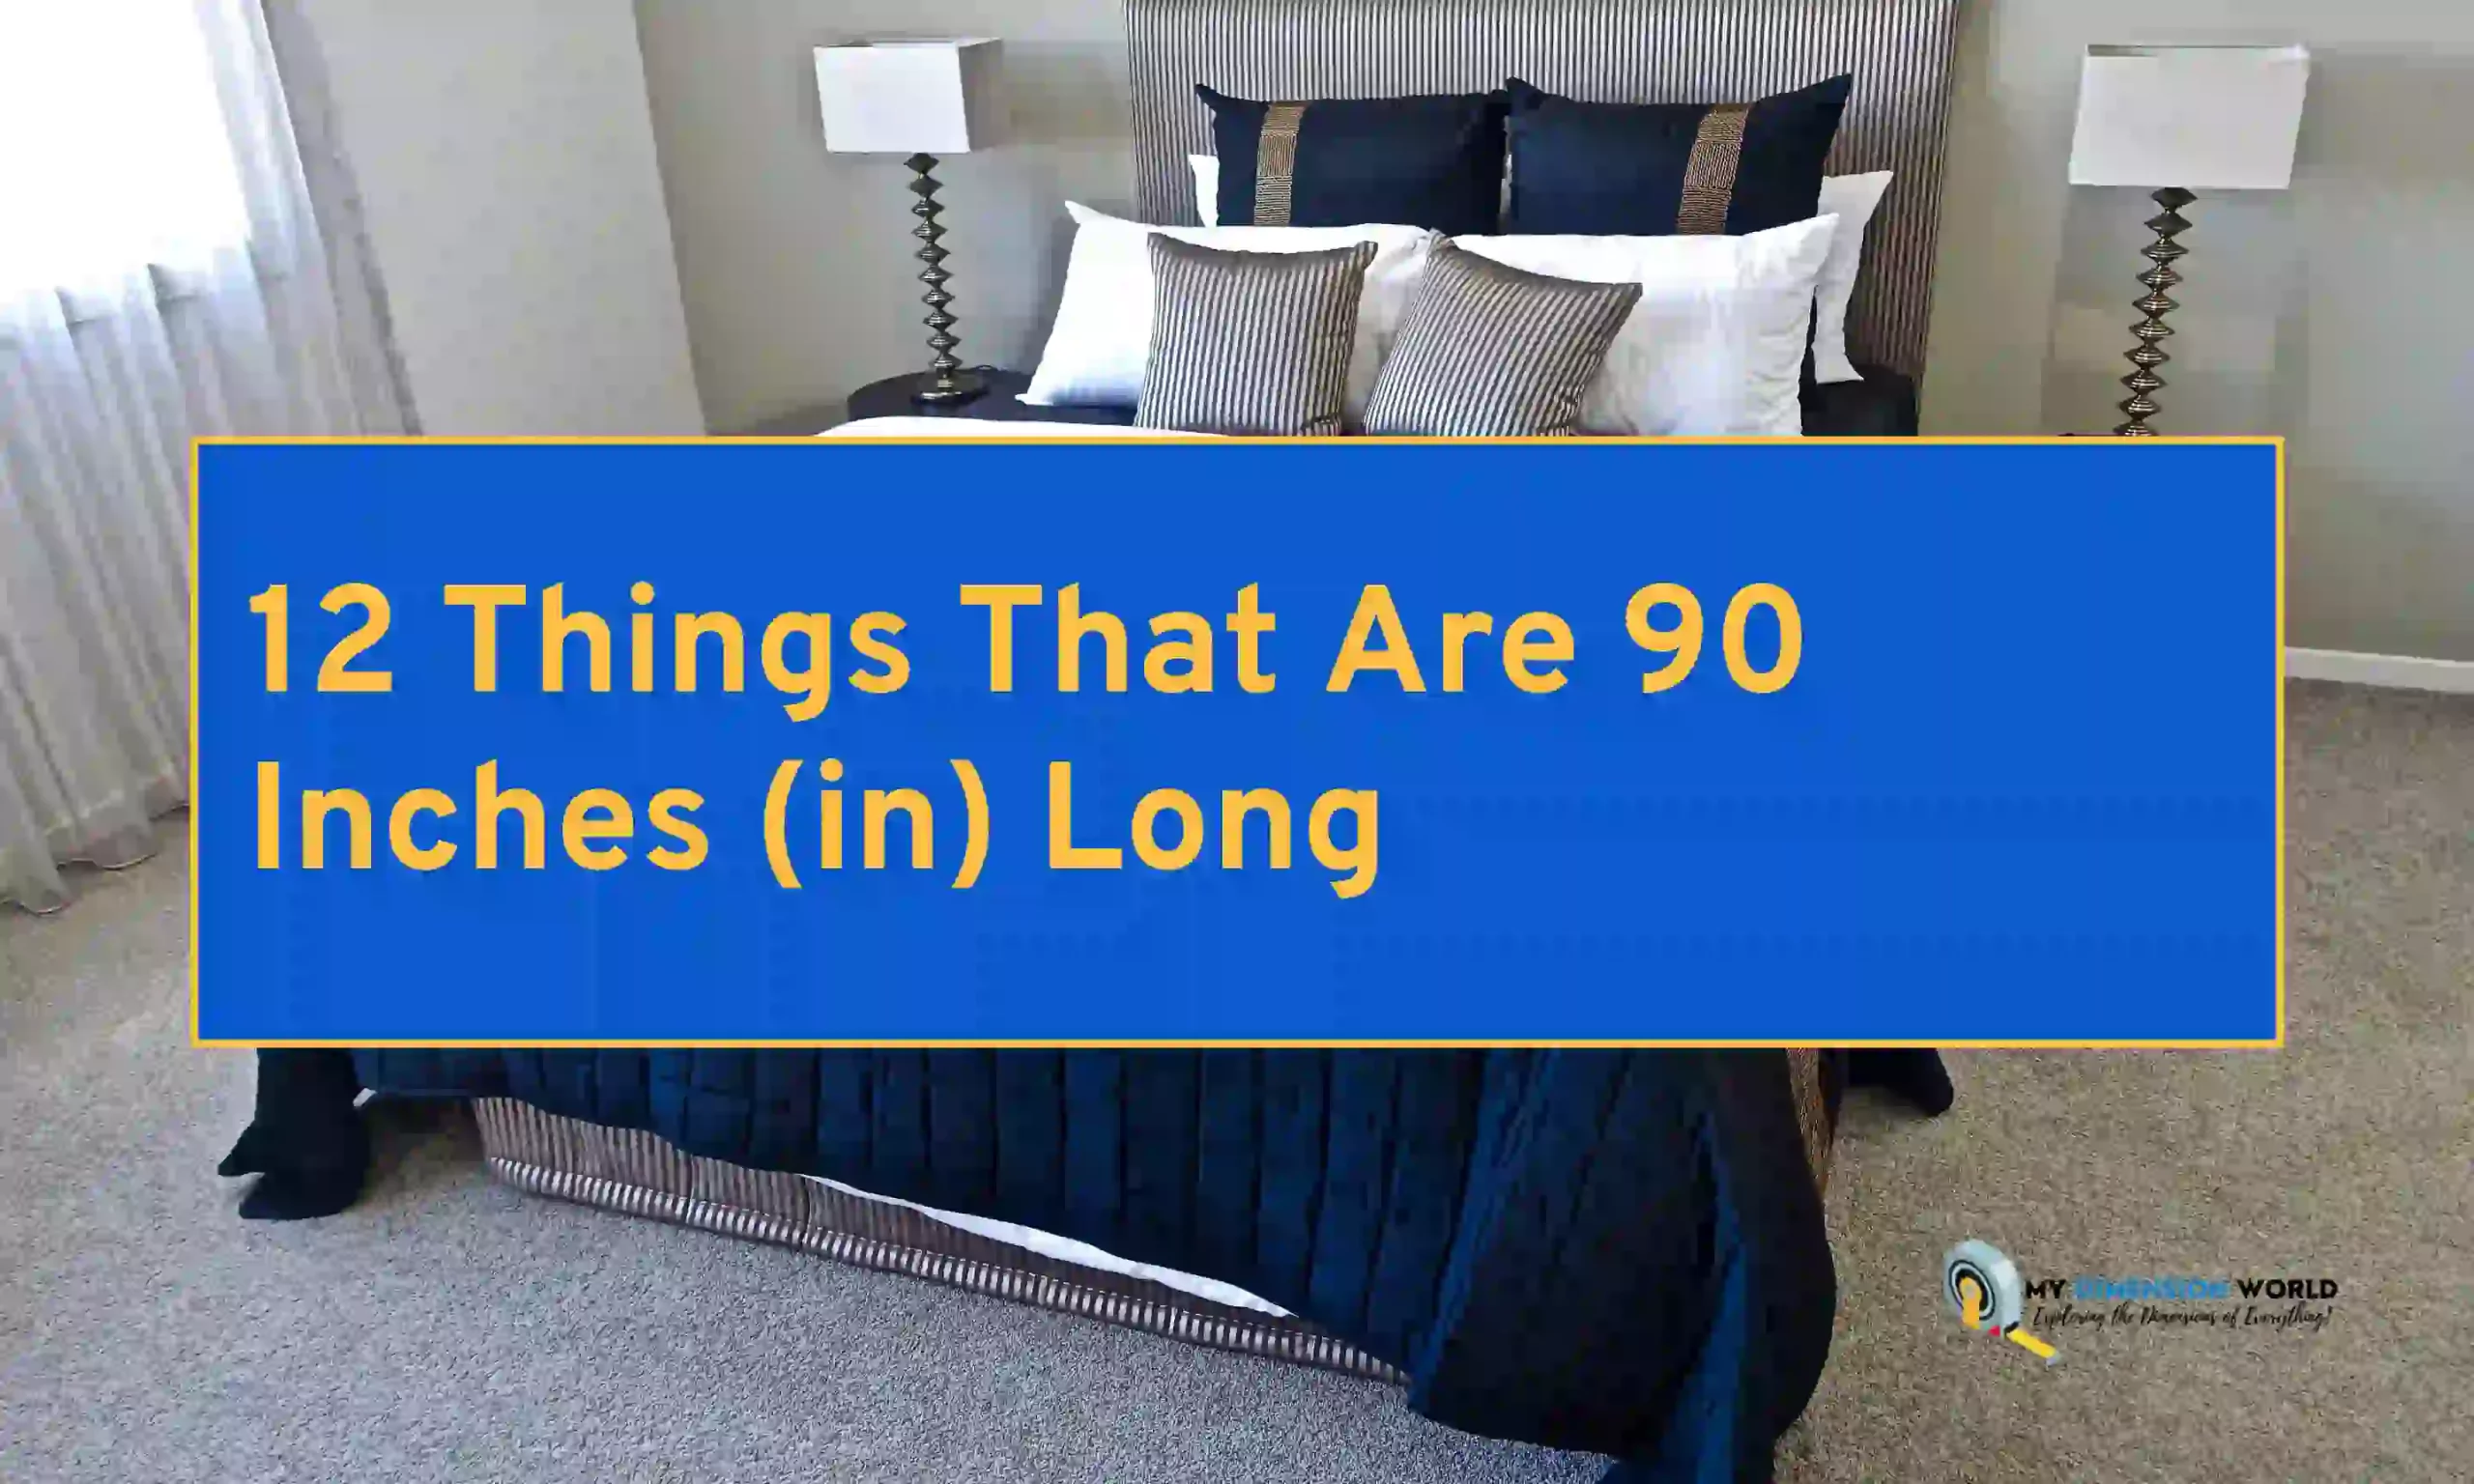 12 Things That Are 90 Inches (in) Long